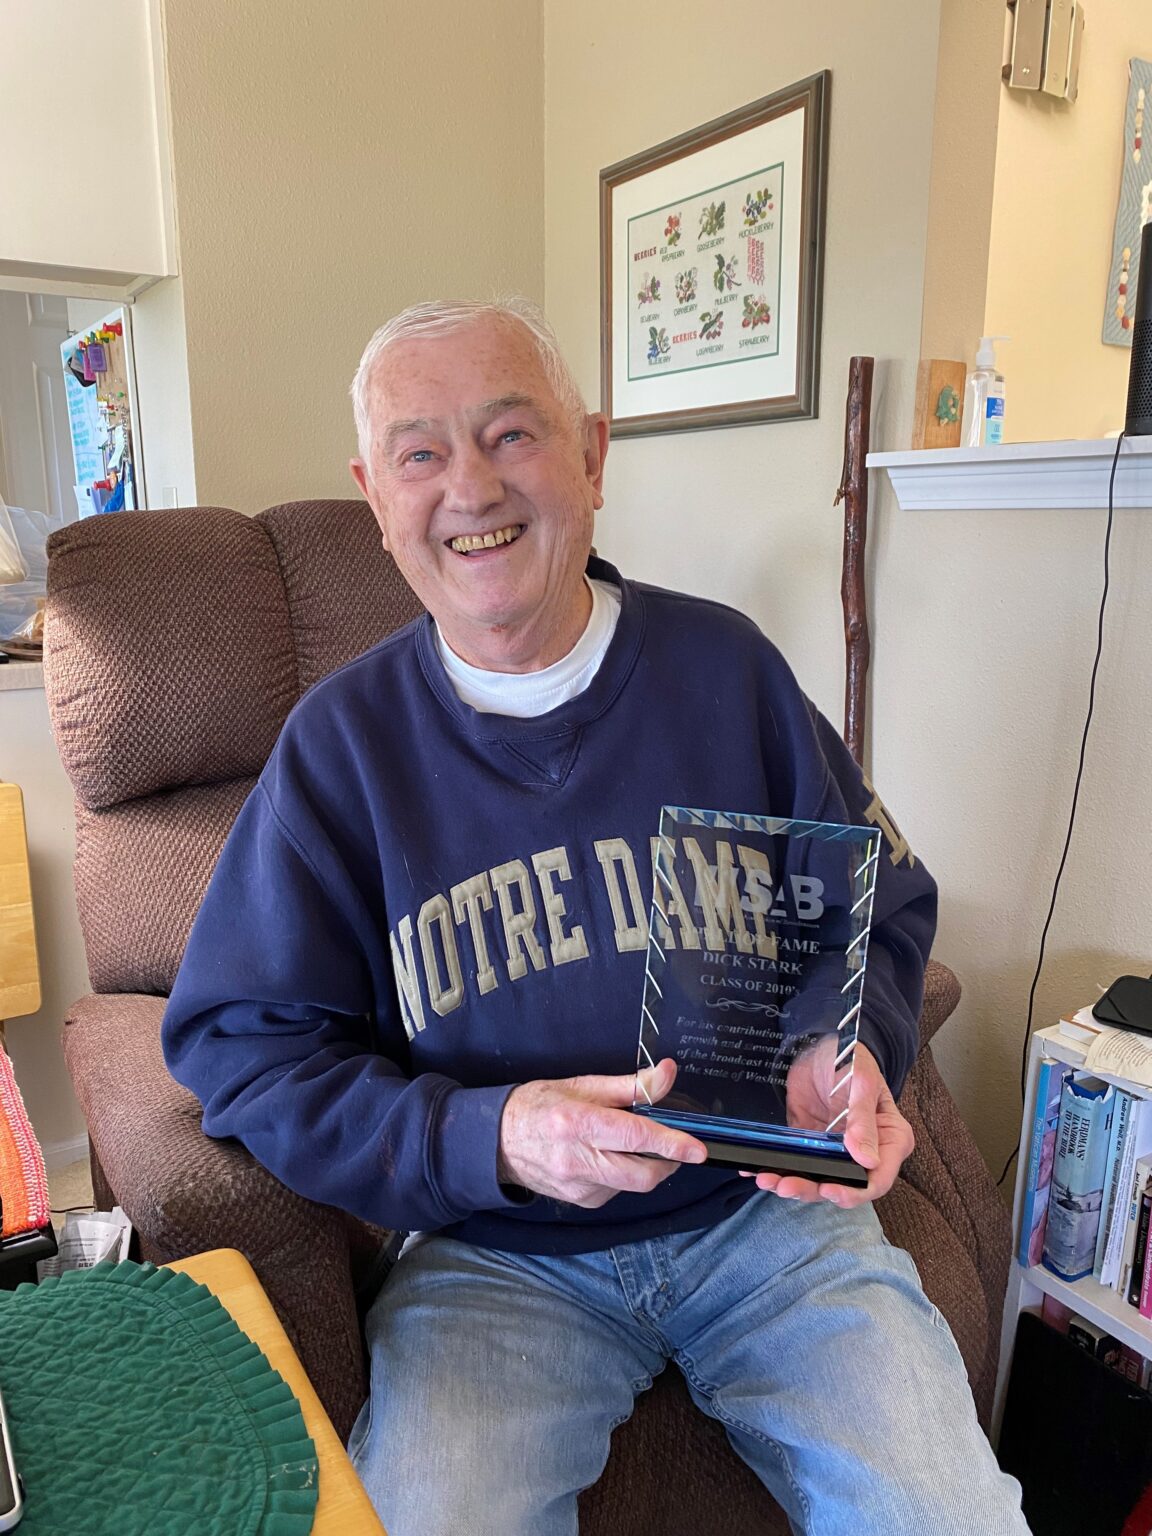 Dick Stark received his Washington State Association of Broadcasters Hall of Fame Award at his home in Bellingham on May 10. The longtime radio broadcaster and Whatcom County youth advocate passed away Tuesday